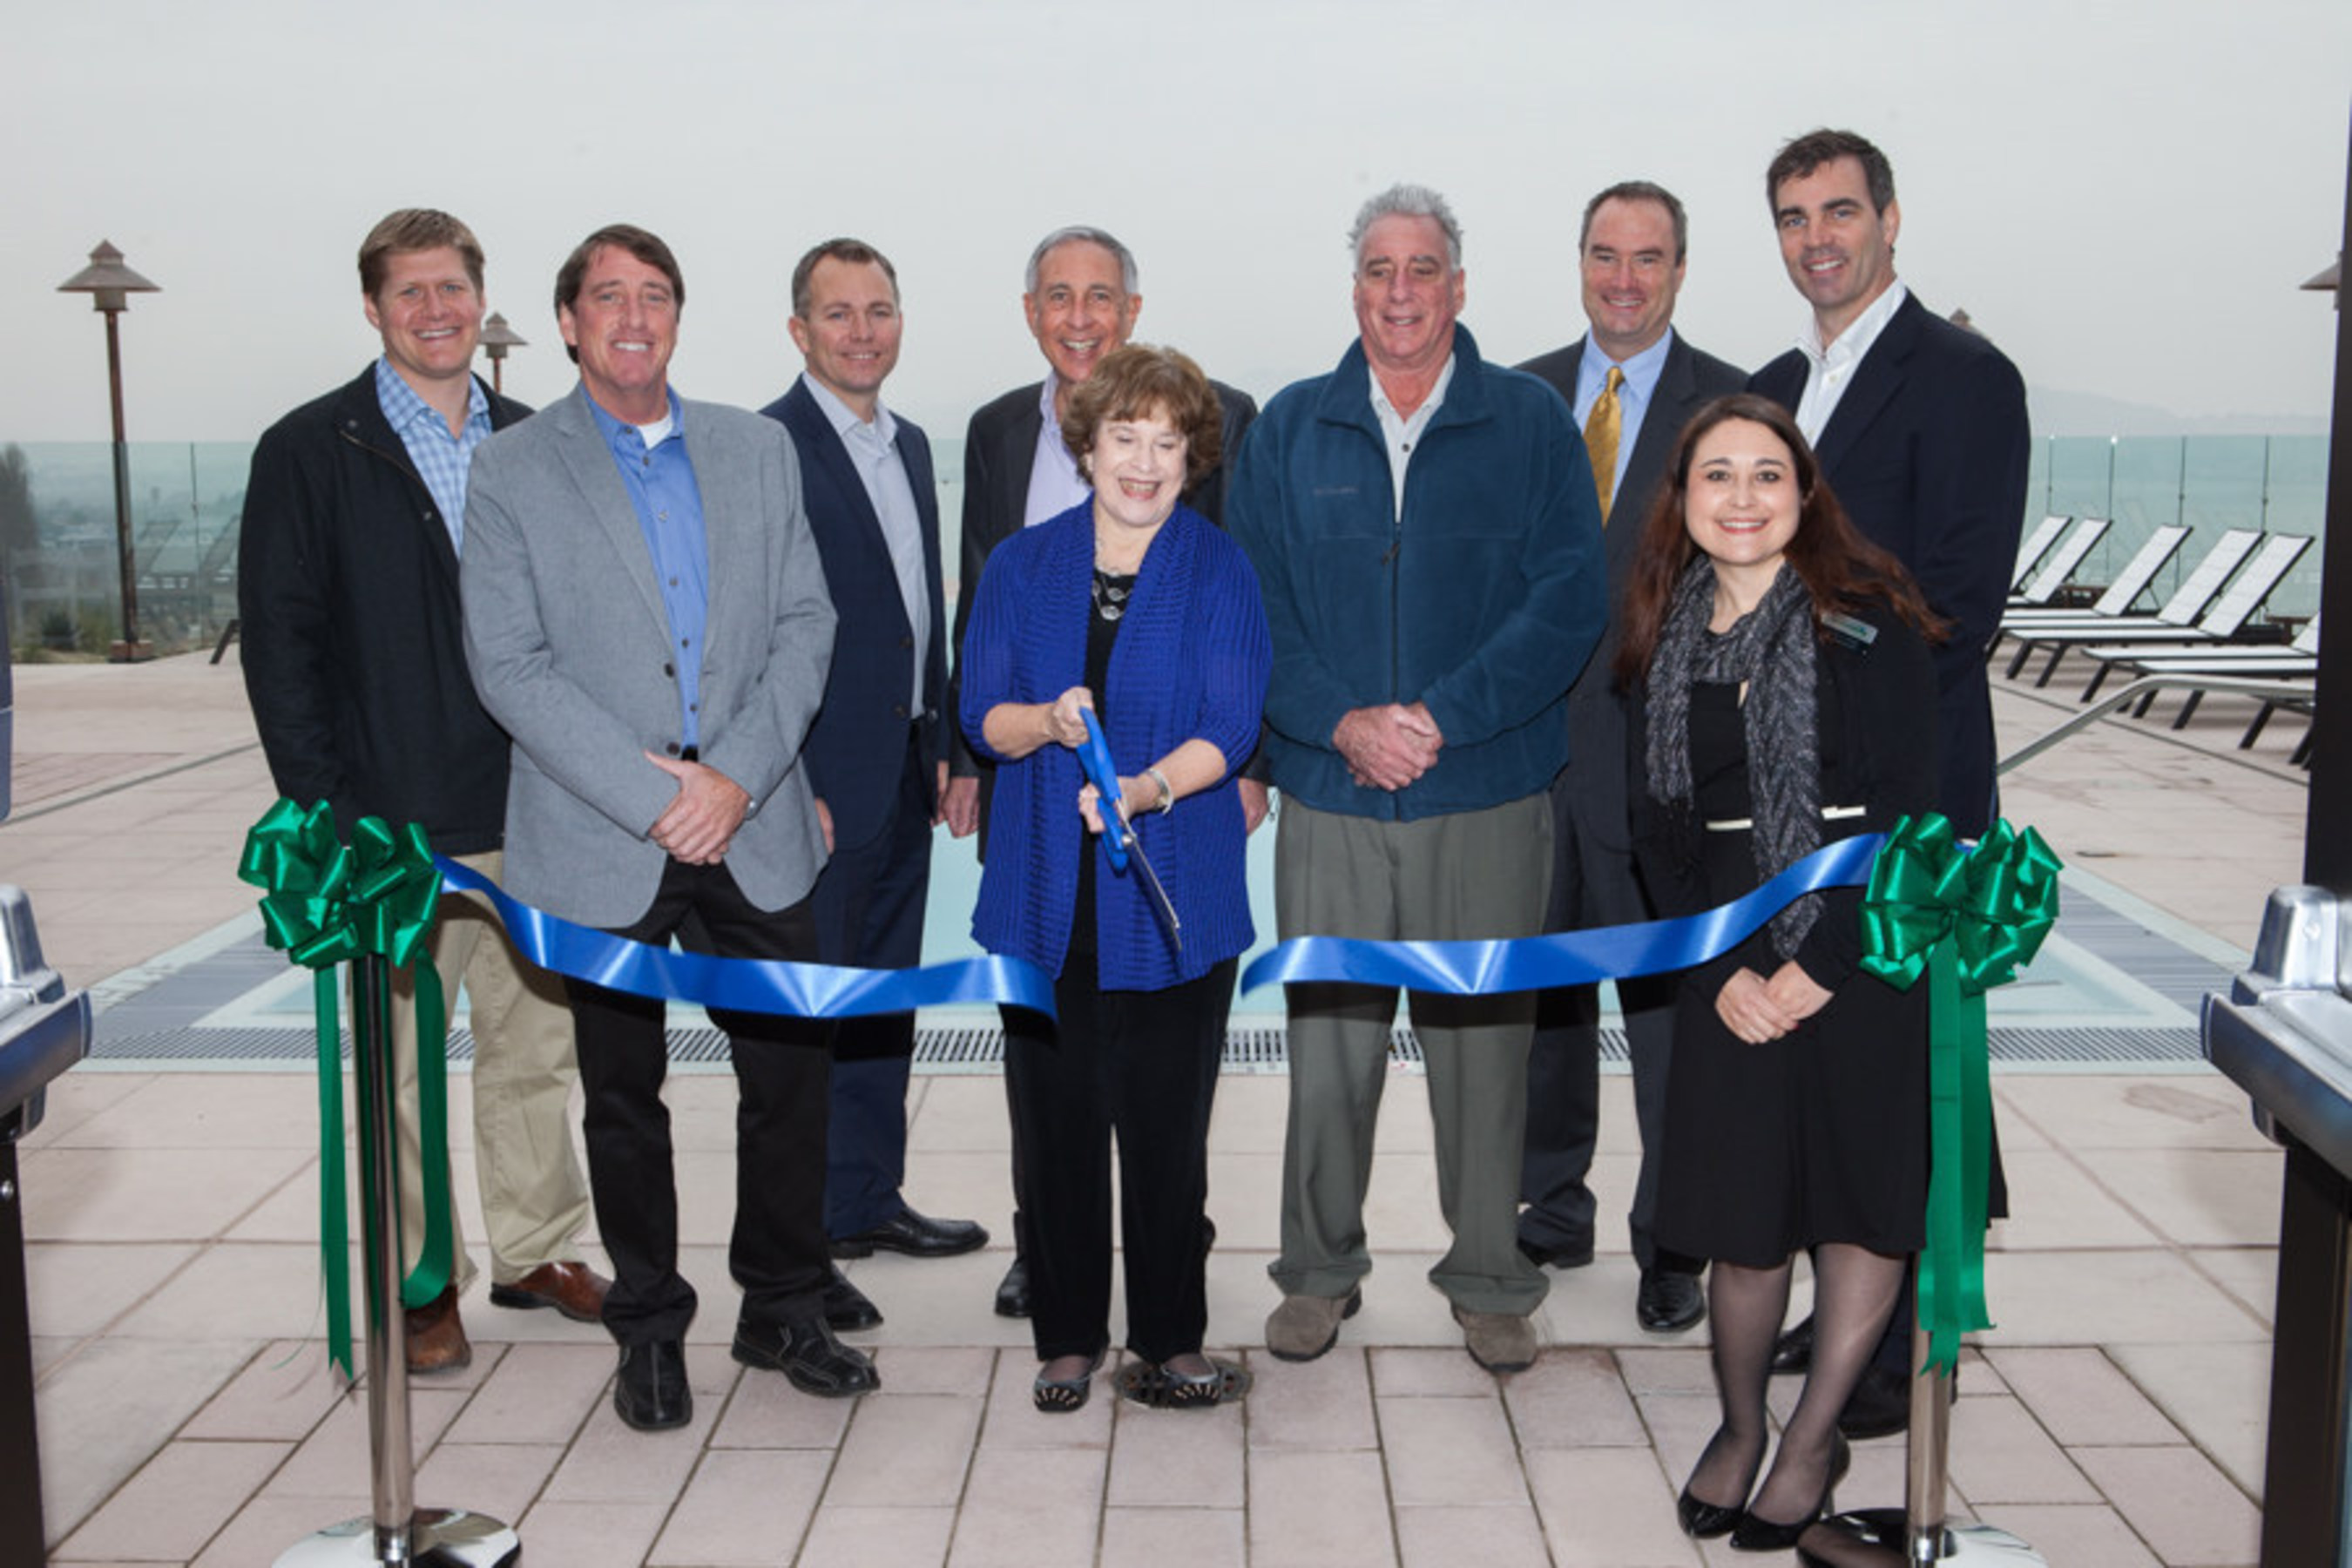 Corte Madera Mayor Carla Condon, Chamber President Stan Hoffman, and Town Manager Dave Bracken join Aimco Chief Investment Officer John Bezzant and Aimco team members to officially cut the ribbon at the grand opening of Preserve at Marin.